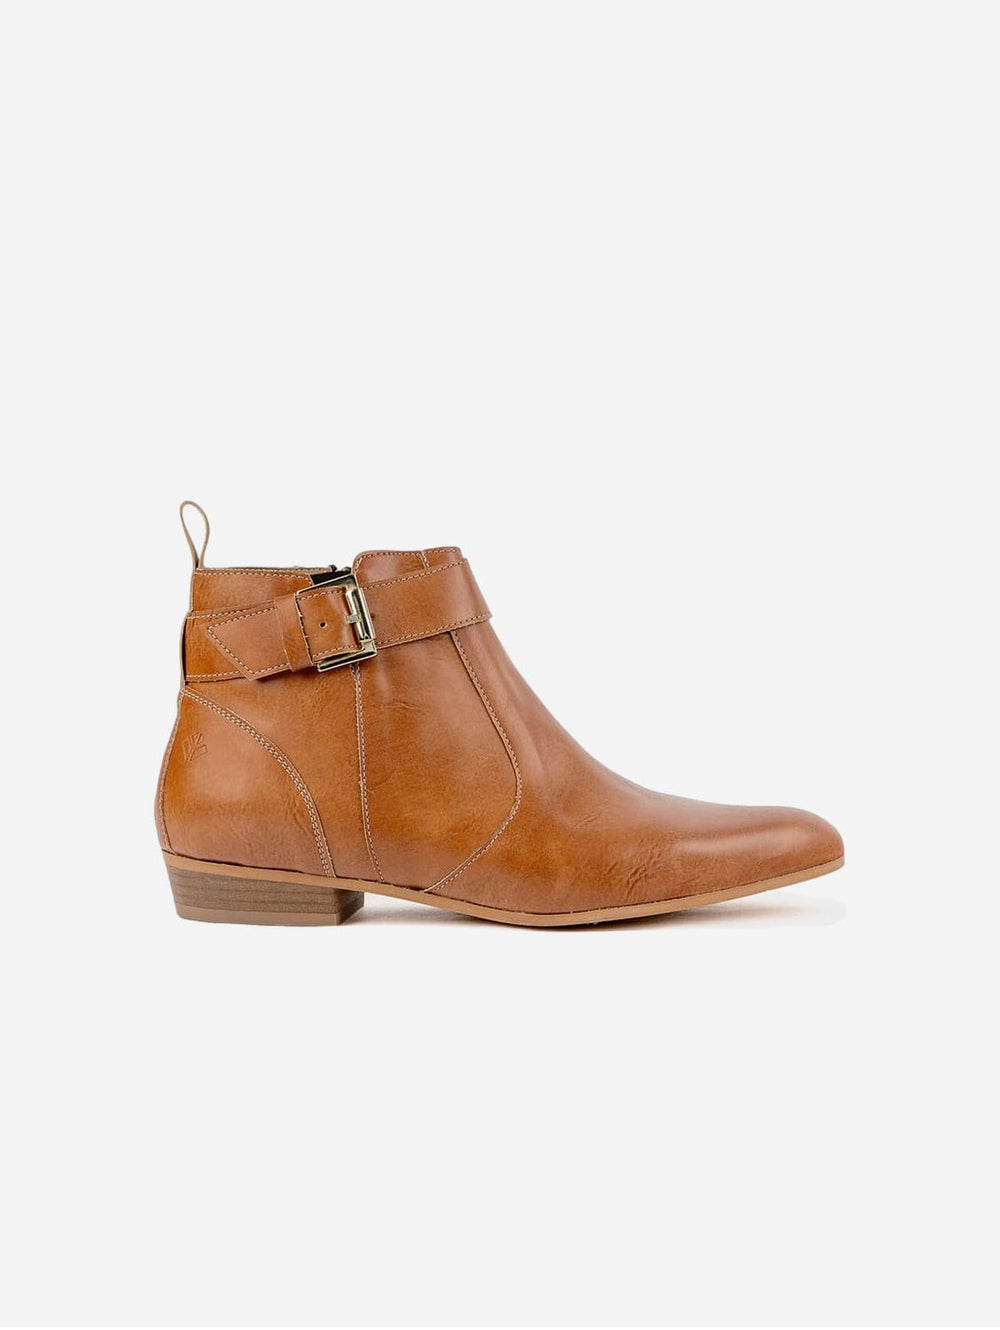 Olympe Women's Vegan Leather Buckle Boots | Camel 